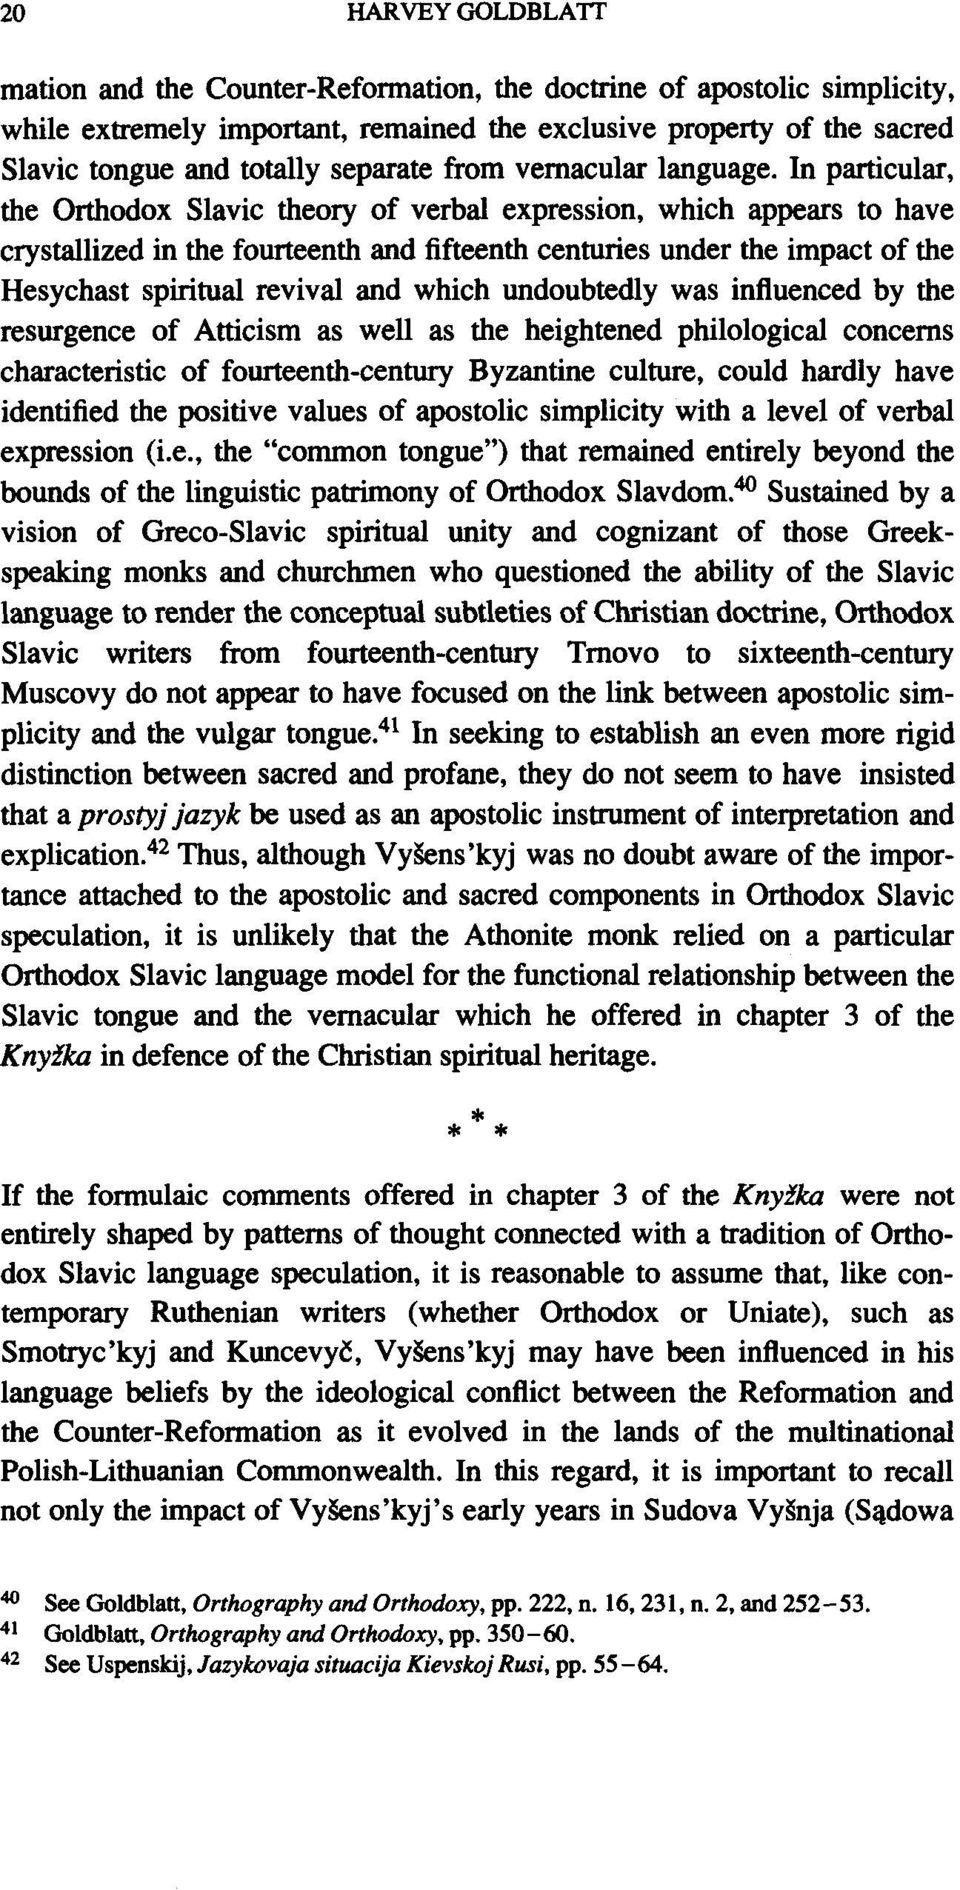 In particular, the Orthodox Slavic theory of verbal expression, which appears to have crystallized in the fourteenth and fifteenth centuries under the impact of the Hesychast spiritual revival and